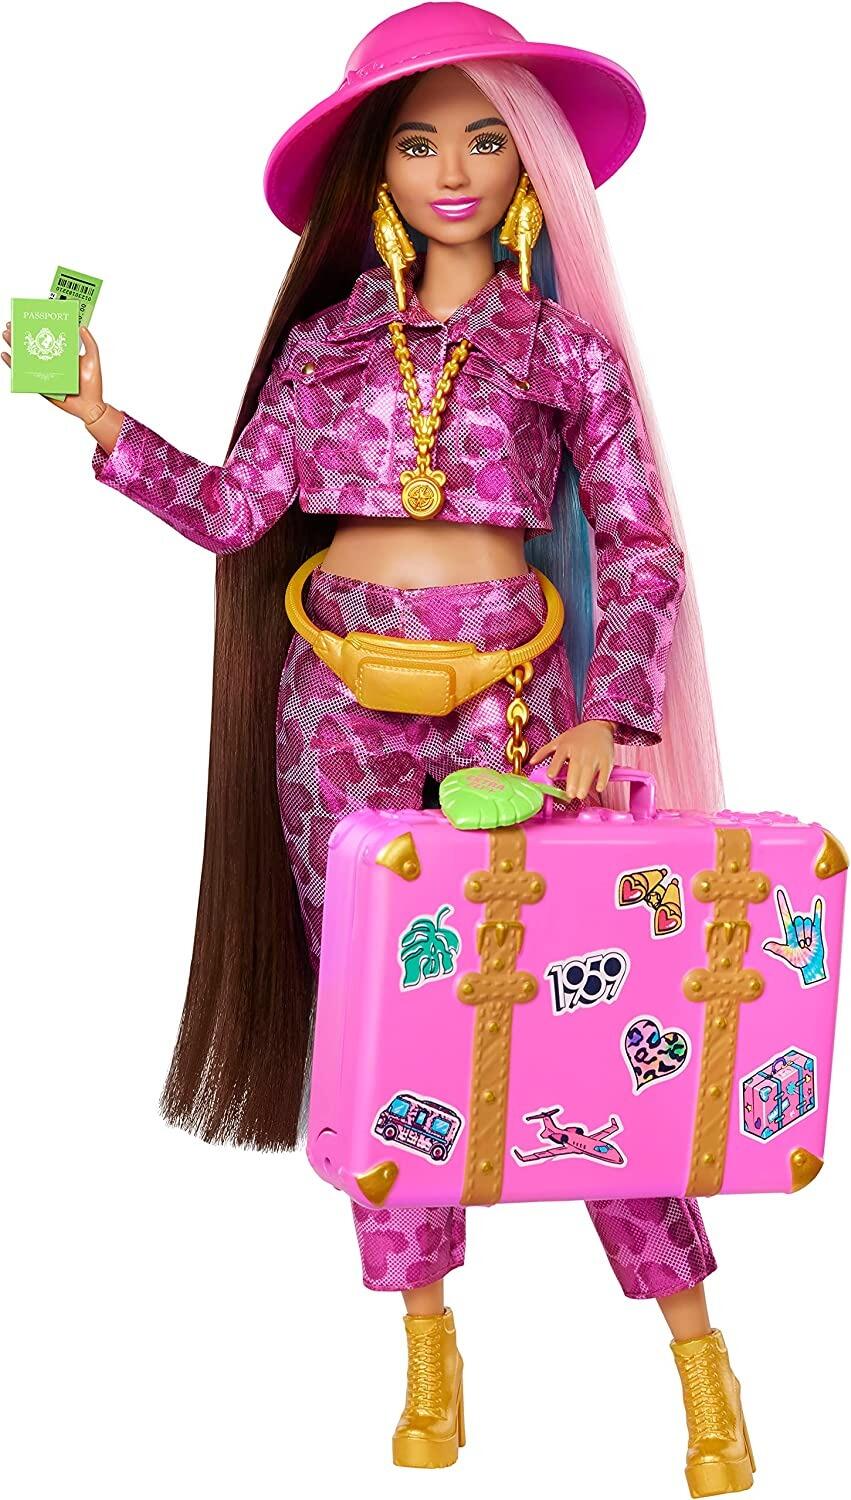 Barbie Extra Fly, Pink Animal Print Outfit and Pink Suitcase, Travel Barbie Doll with Safari Fashion